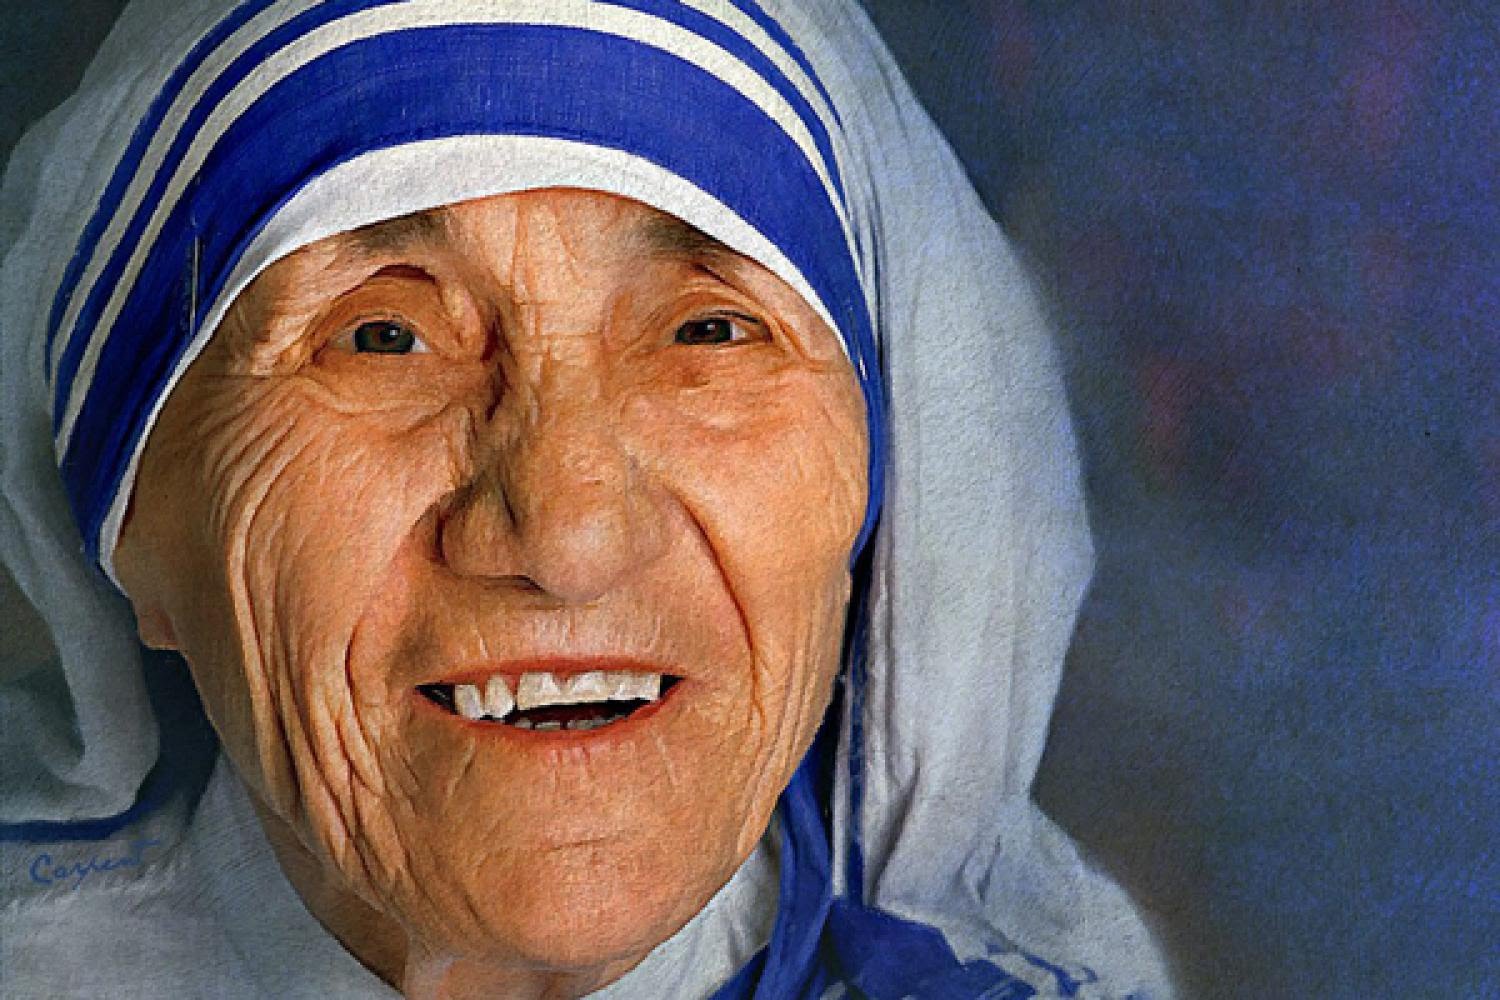 A picture of St. Teresa of Calcutta smiling and wearing her white and blue habit